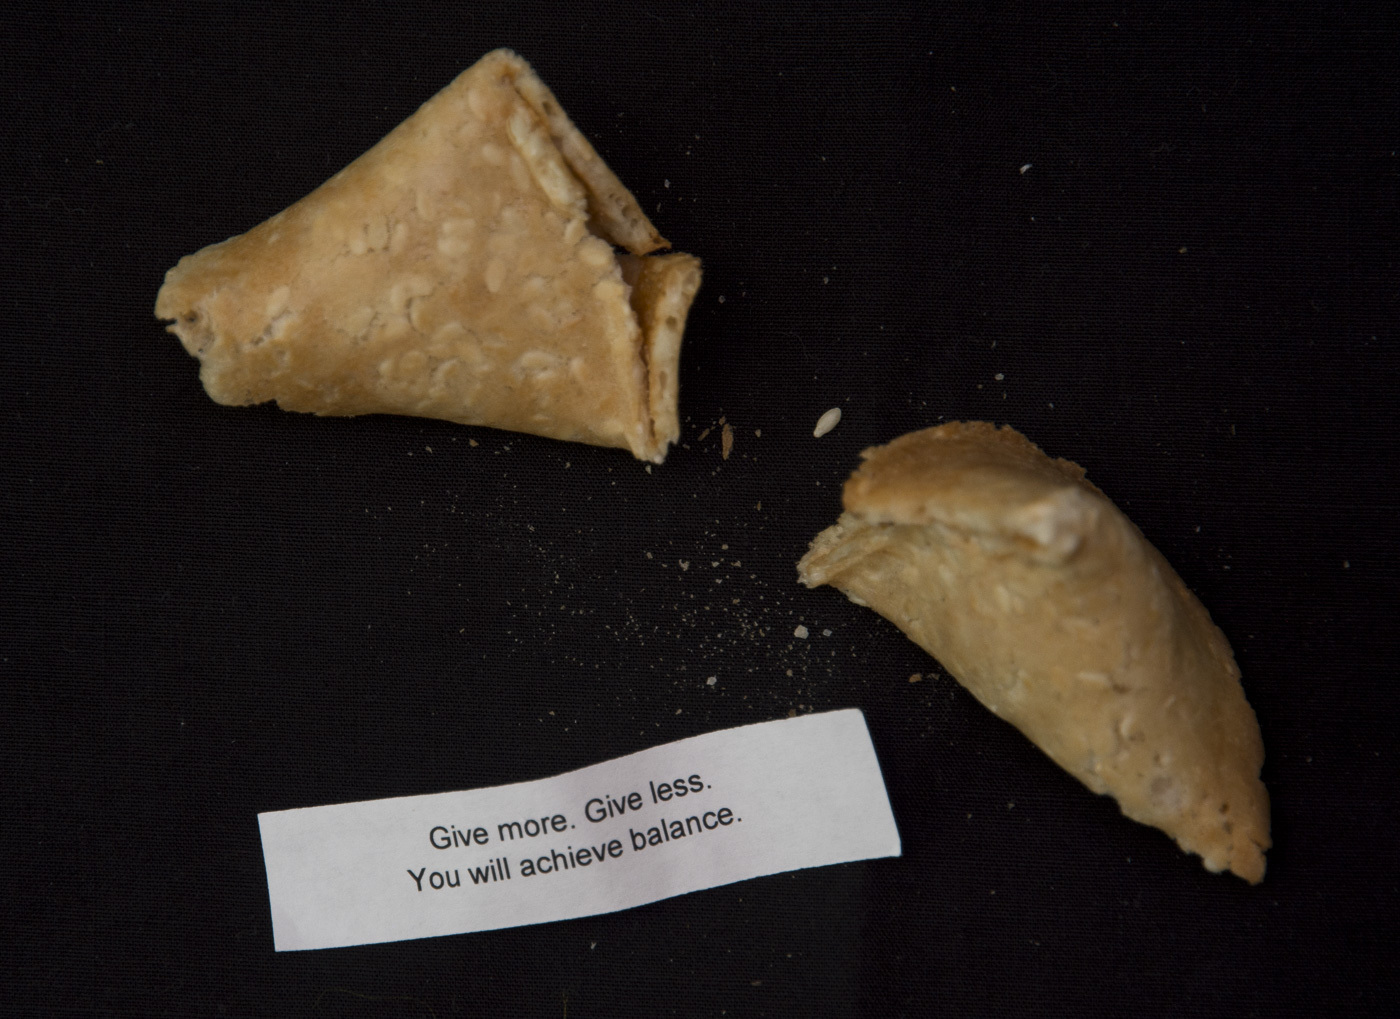 broken fortune cookie with the fortune reading "Give more. Give less. You will achieve balance"